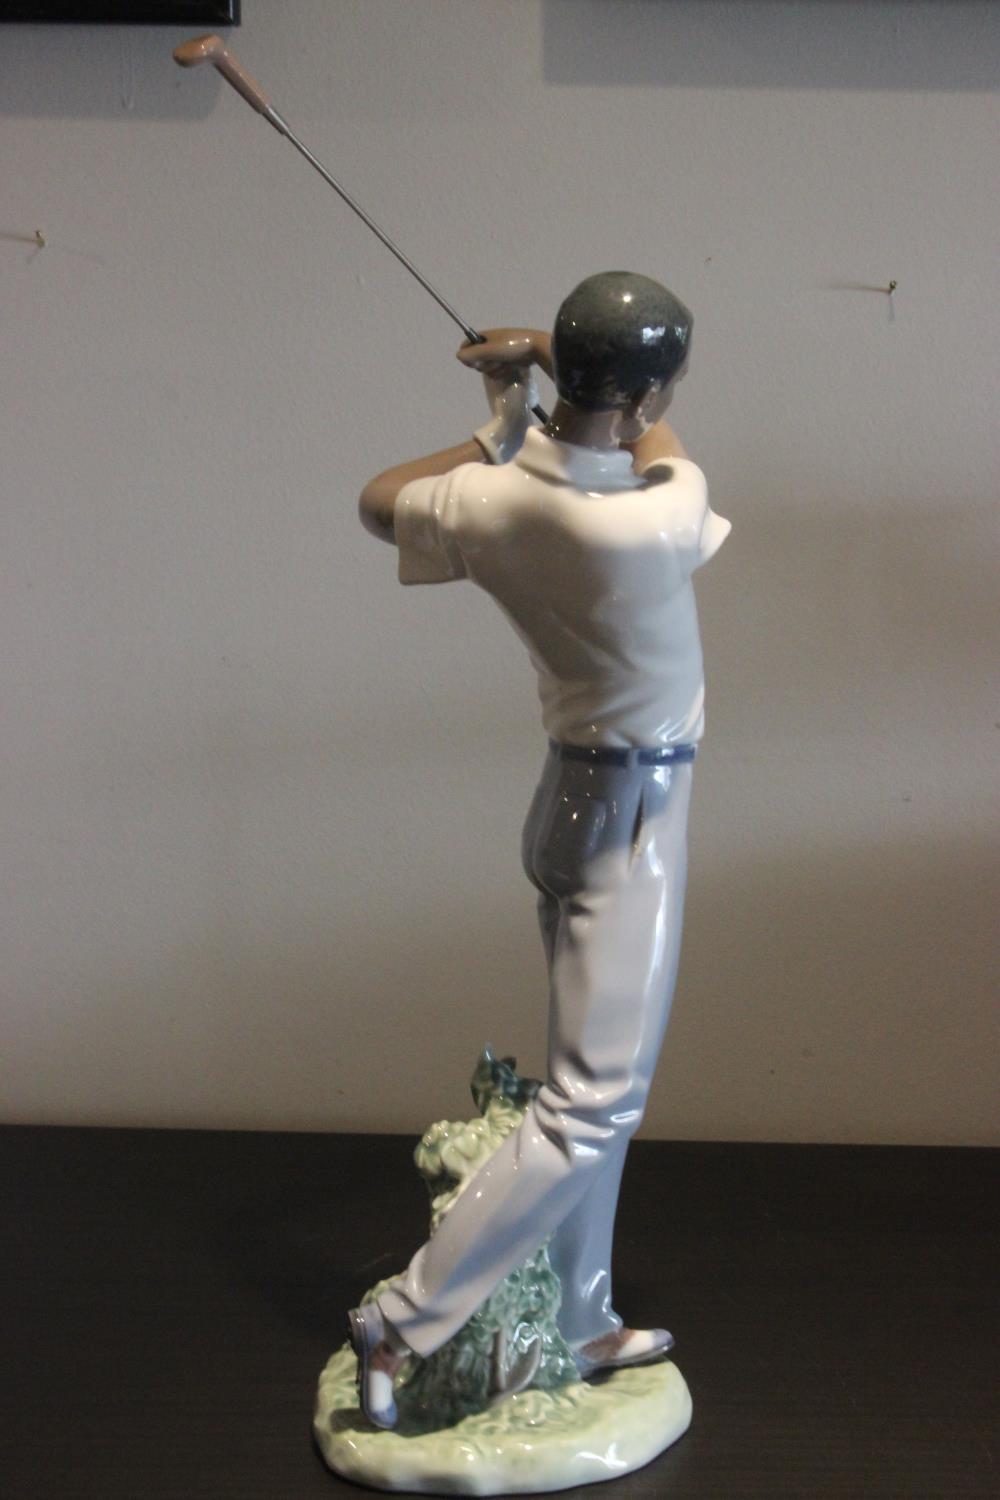 Lladro Black Legacy Collection ' The Perfect Swing' No 6845 issued in 2002, Sculpted by Regino - Image 4 of 7